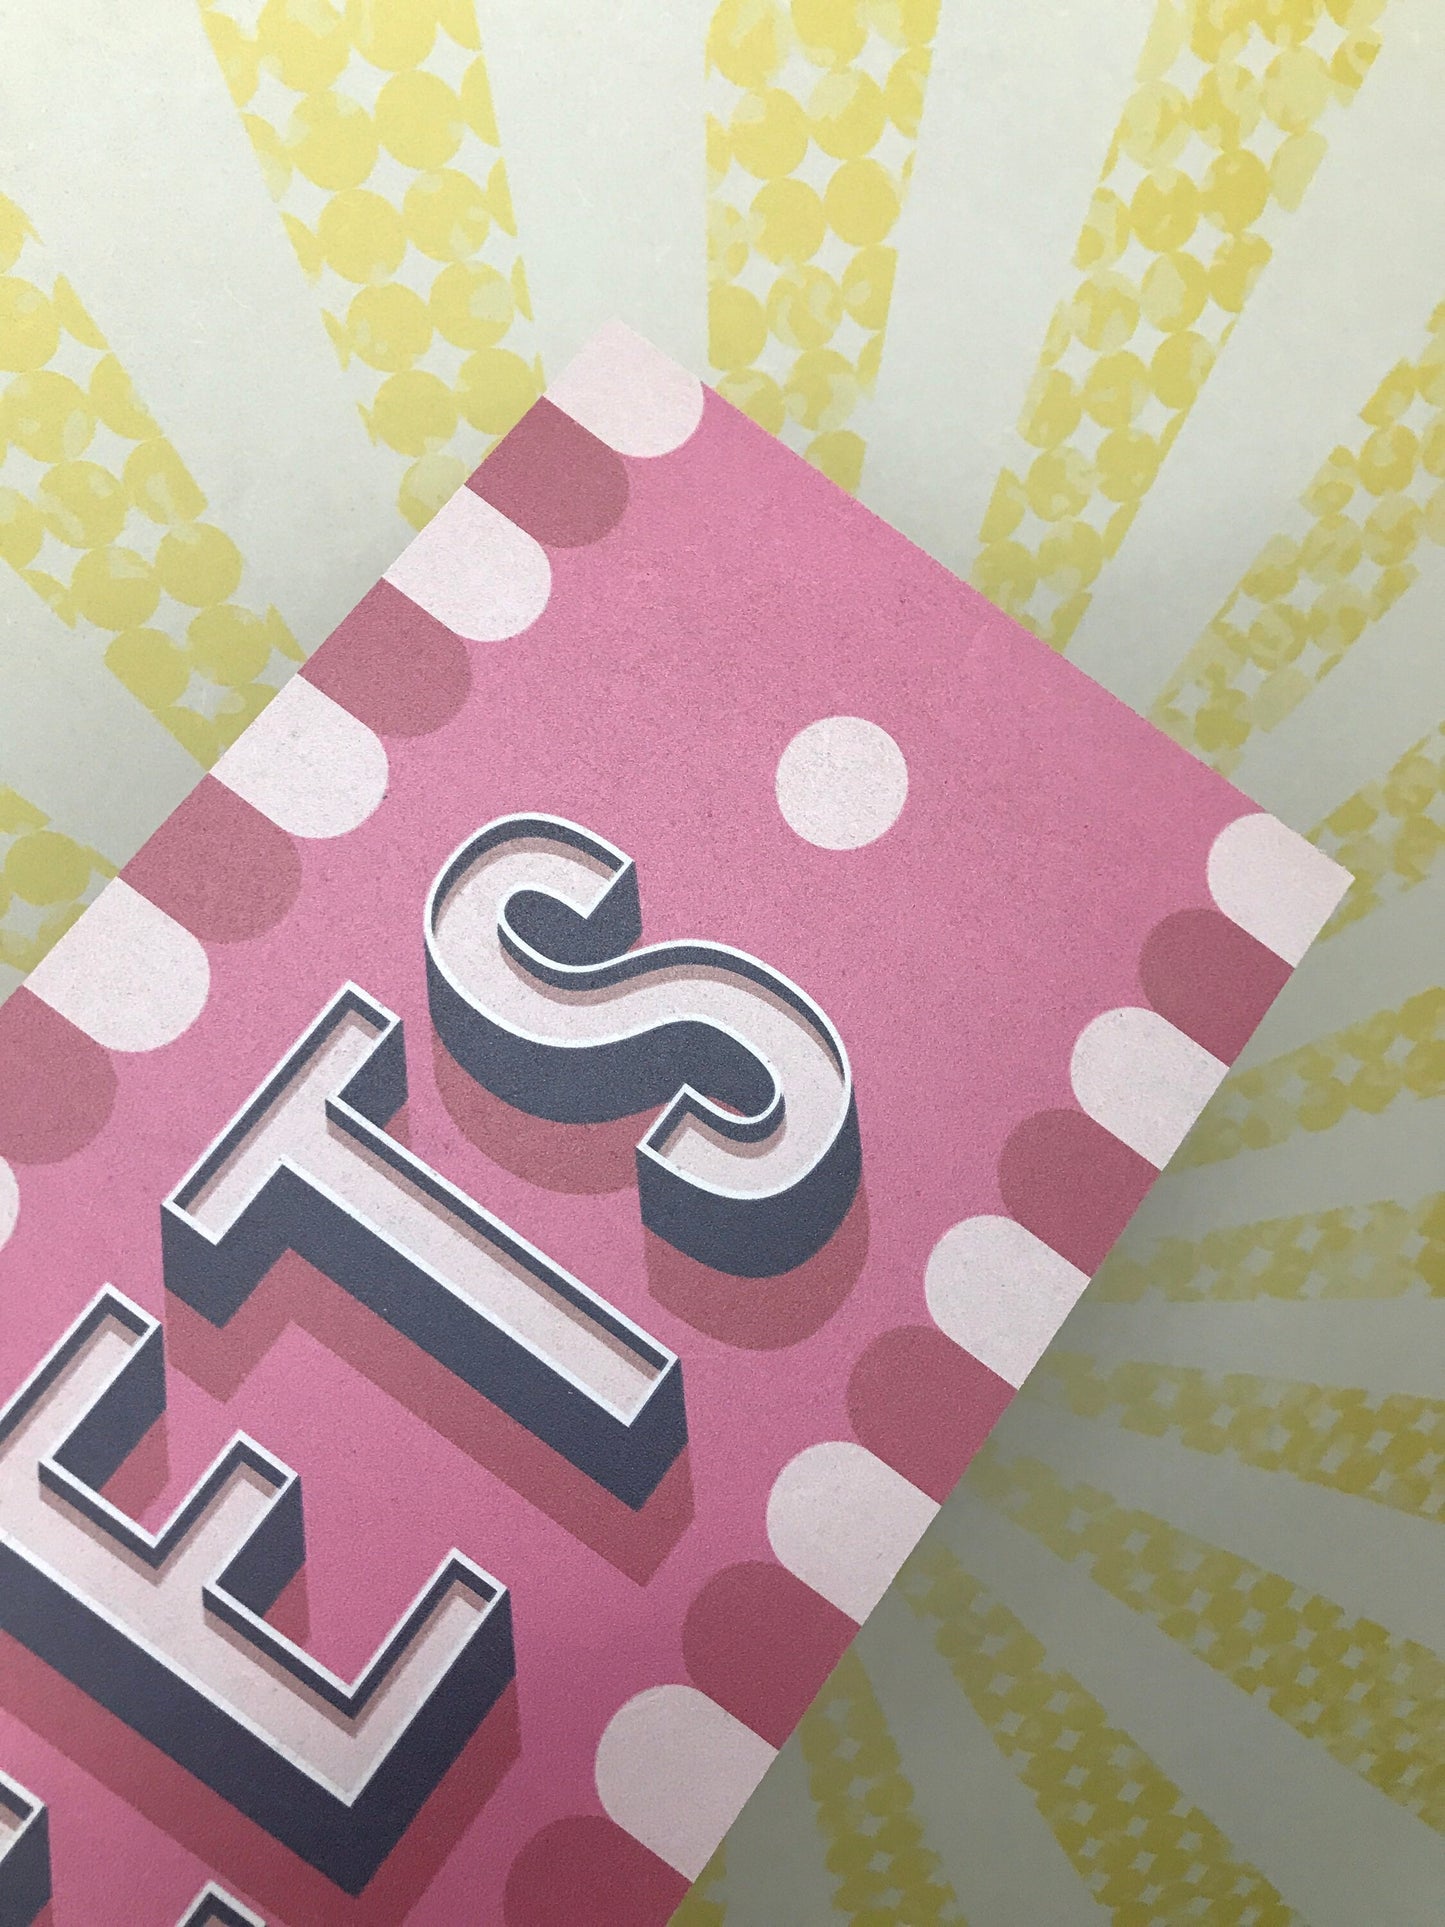 Retro Pink Sweets Sign